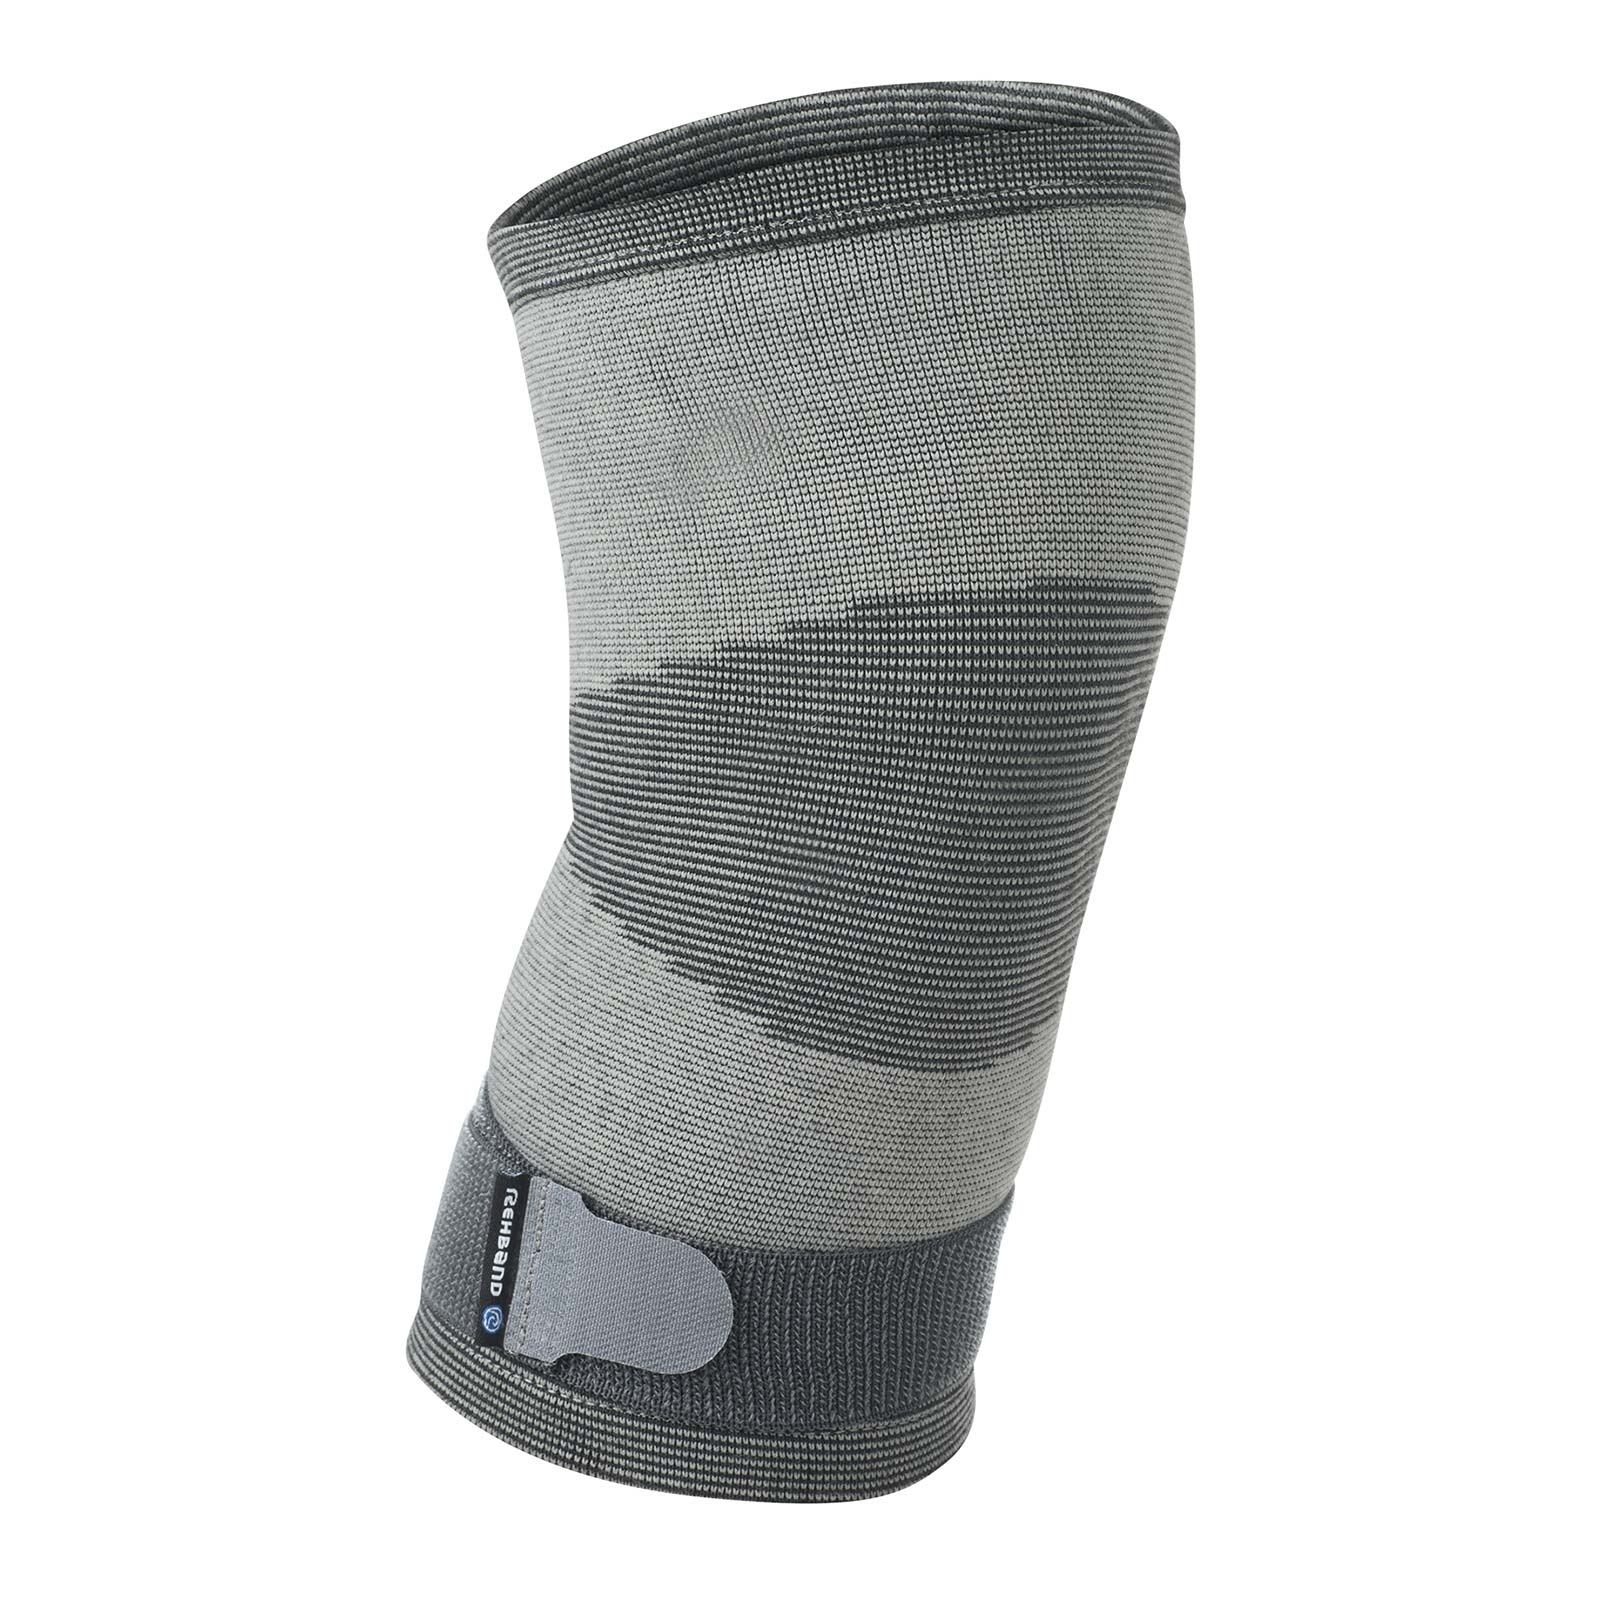 A grey knitted knee sleeve with an adjuster at the bottom